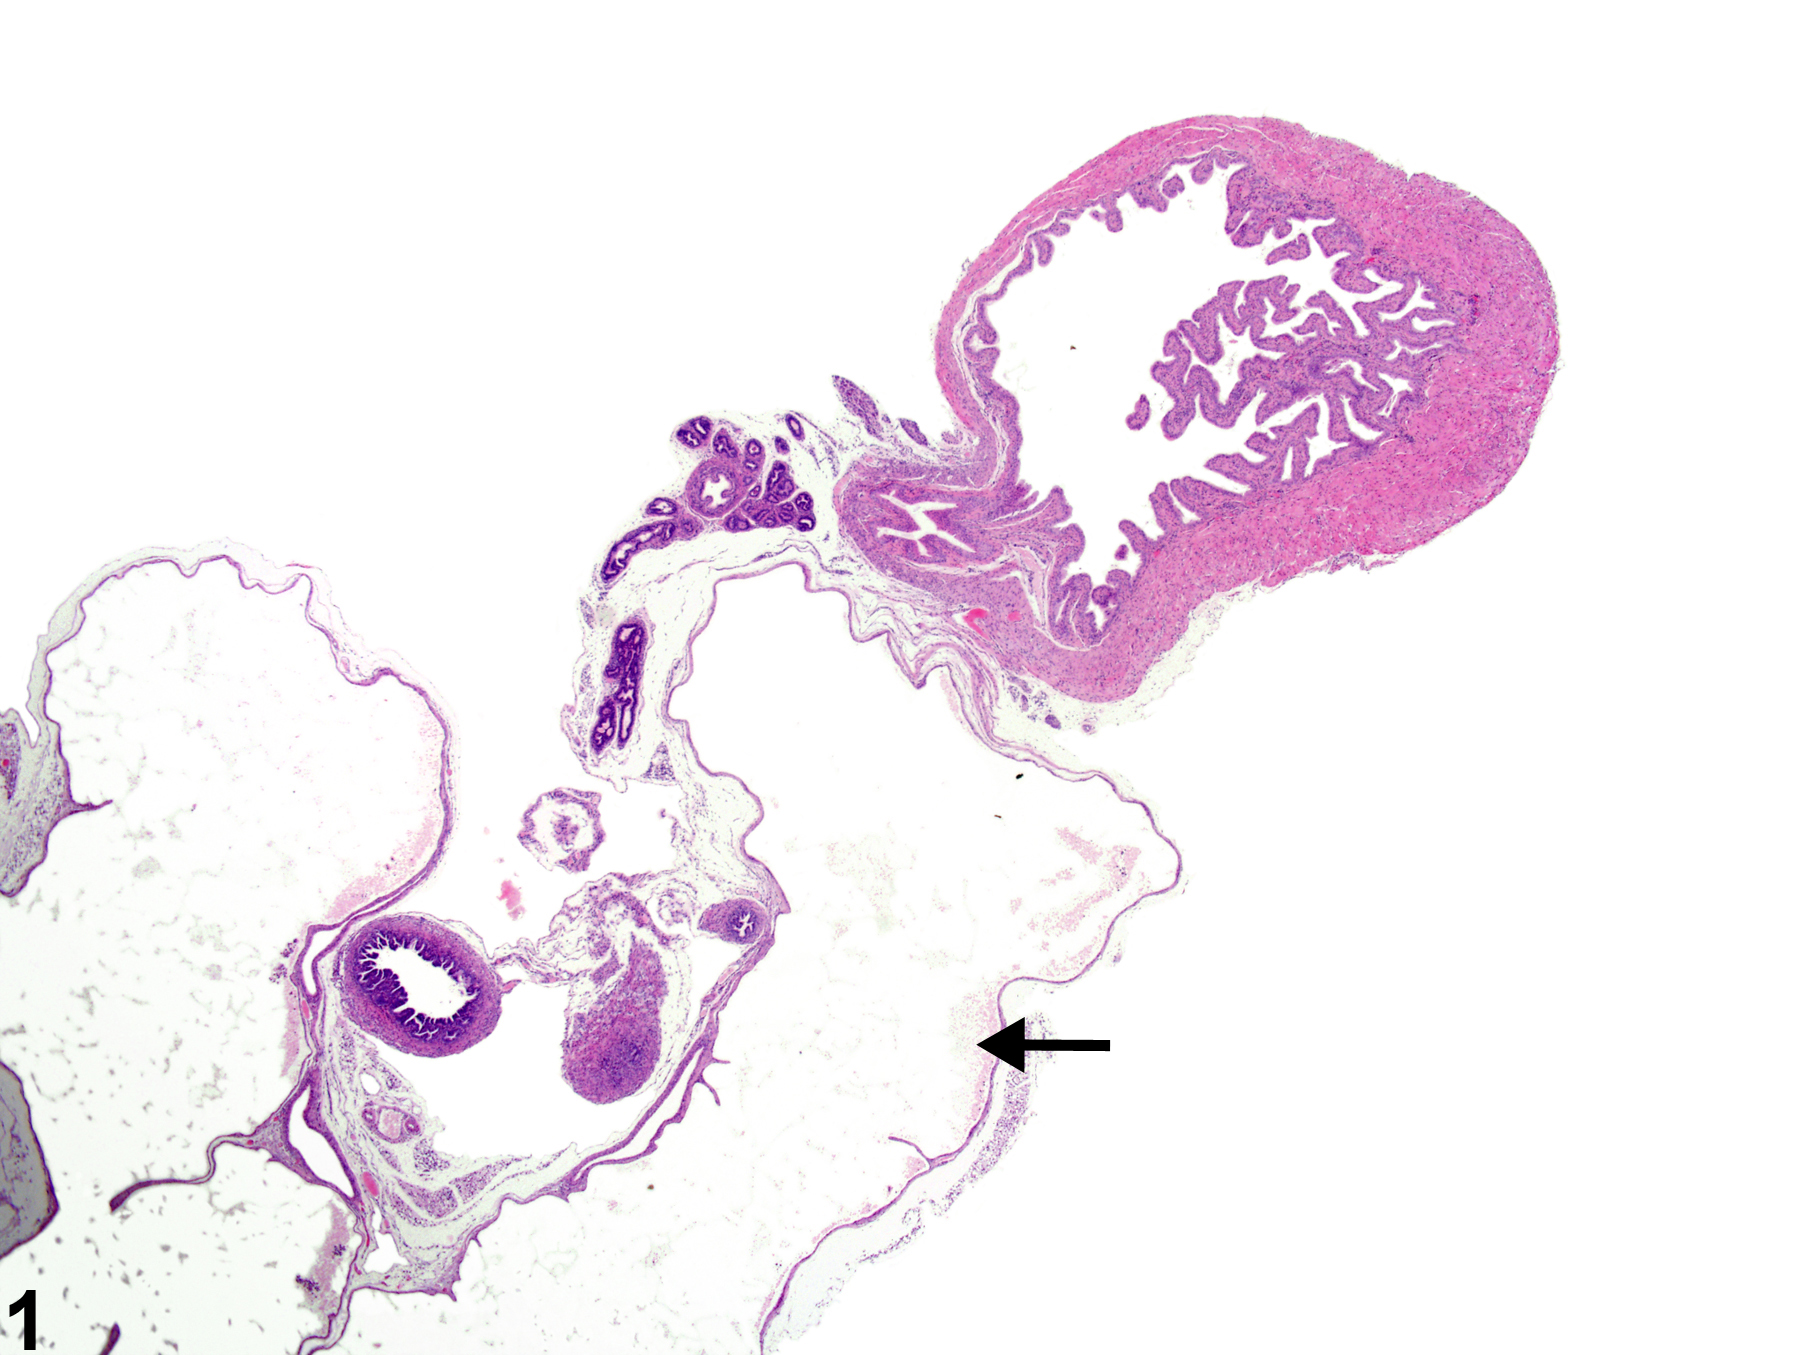 Image of dilation in the ureter from a male mouse